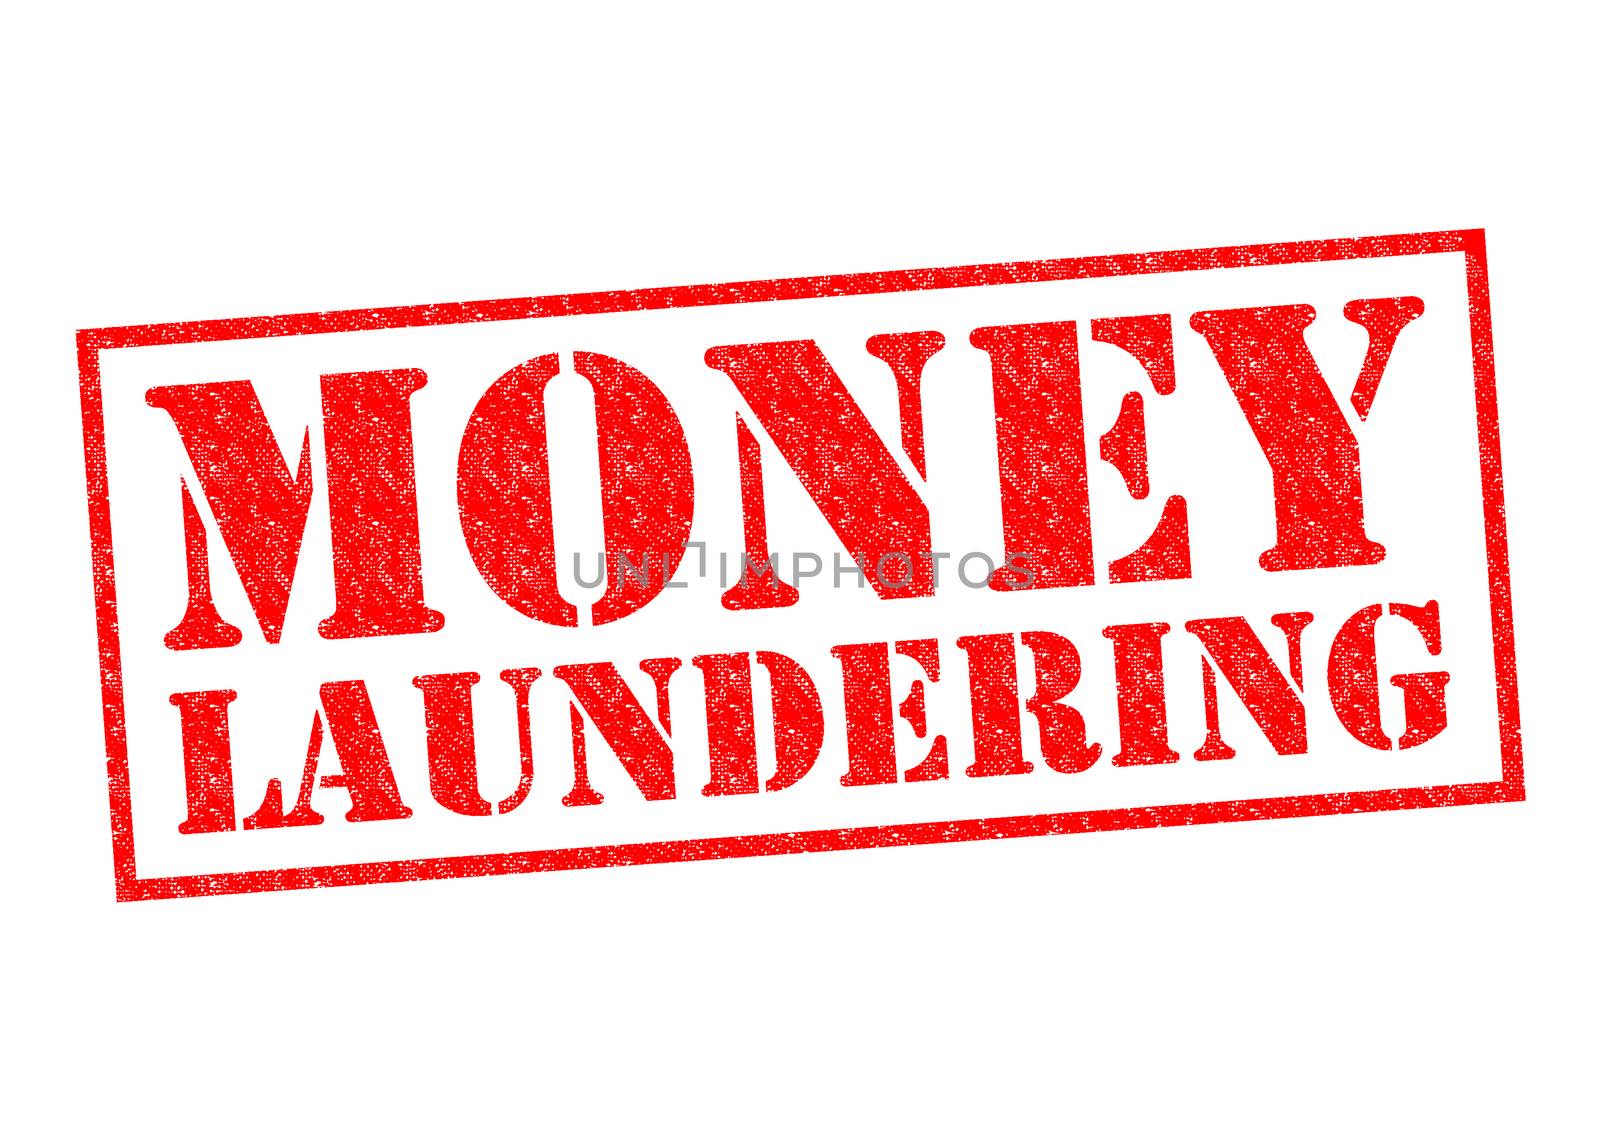 MONEY LAUNDERING red Rubber Stamp over a white background.